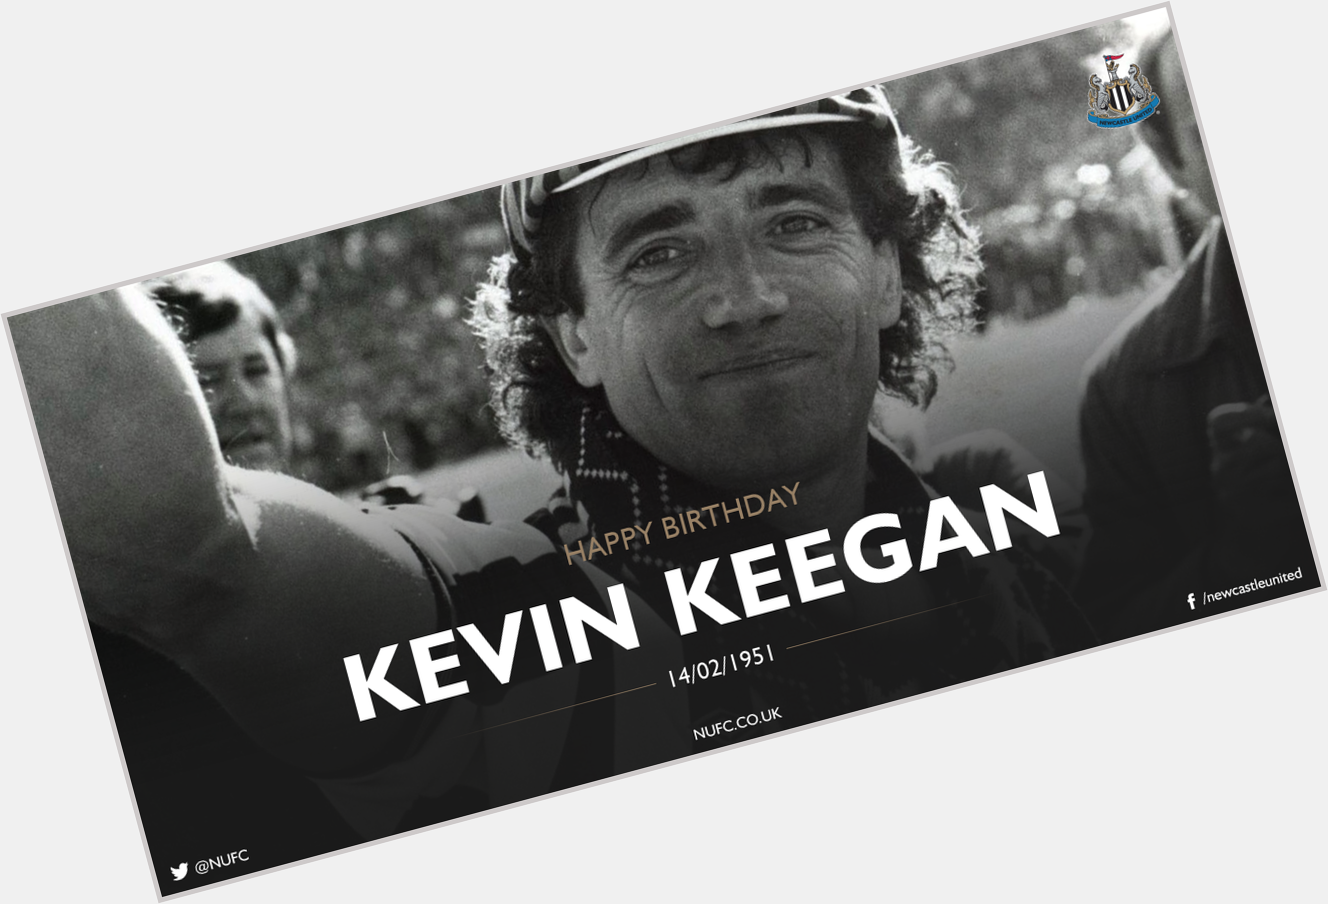 Happy birthday to Newcastle United legend, Kevin Keegan - 66 today!    